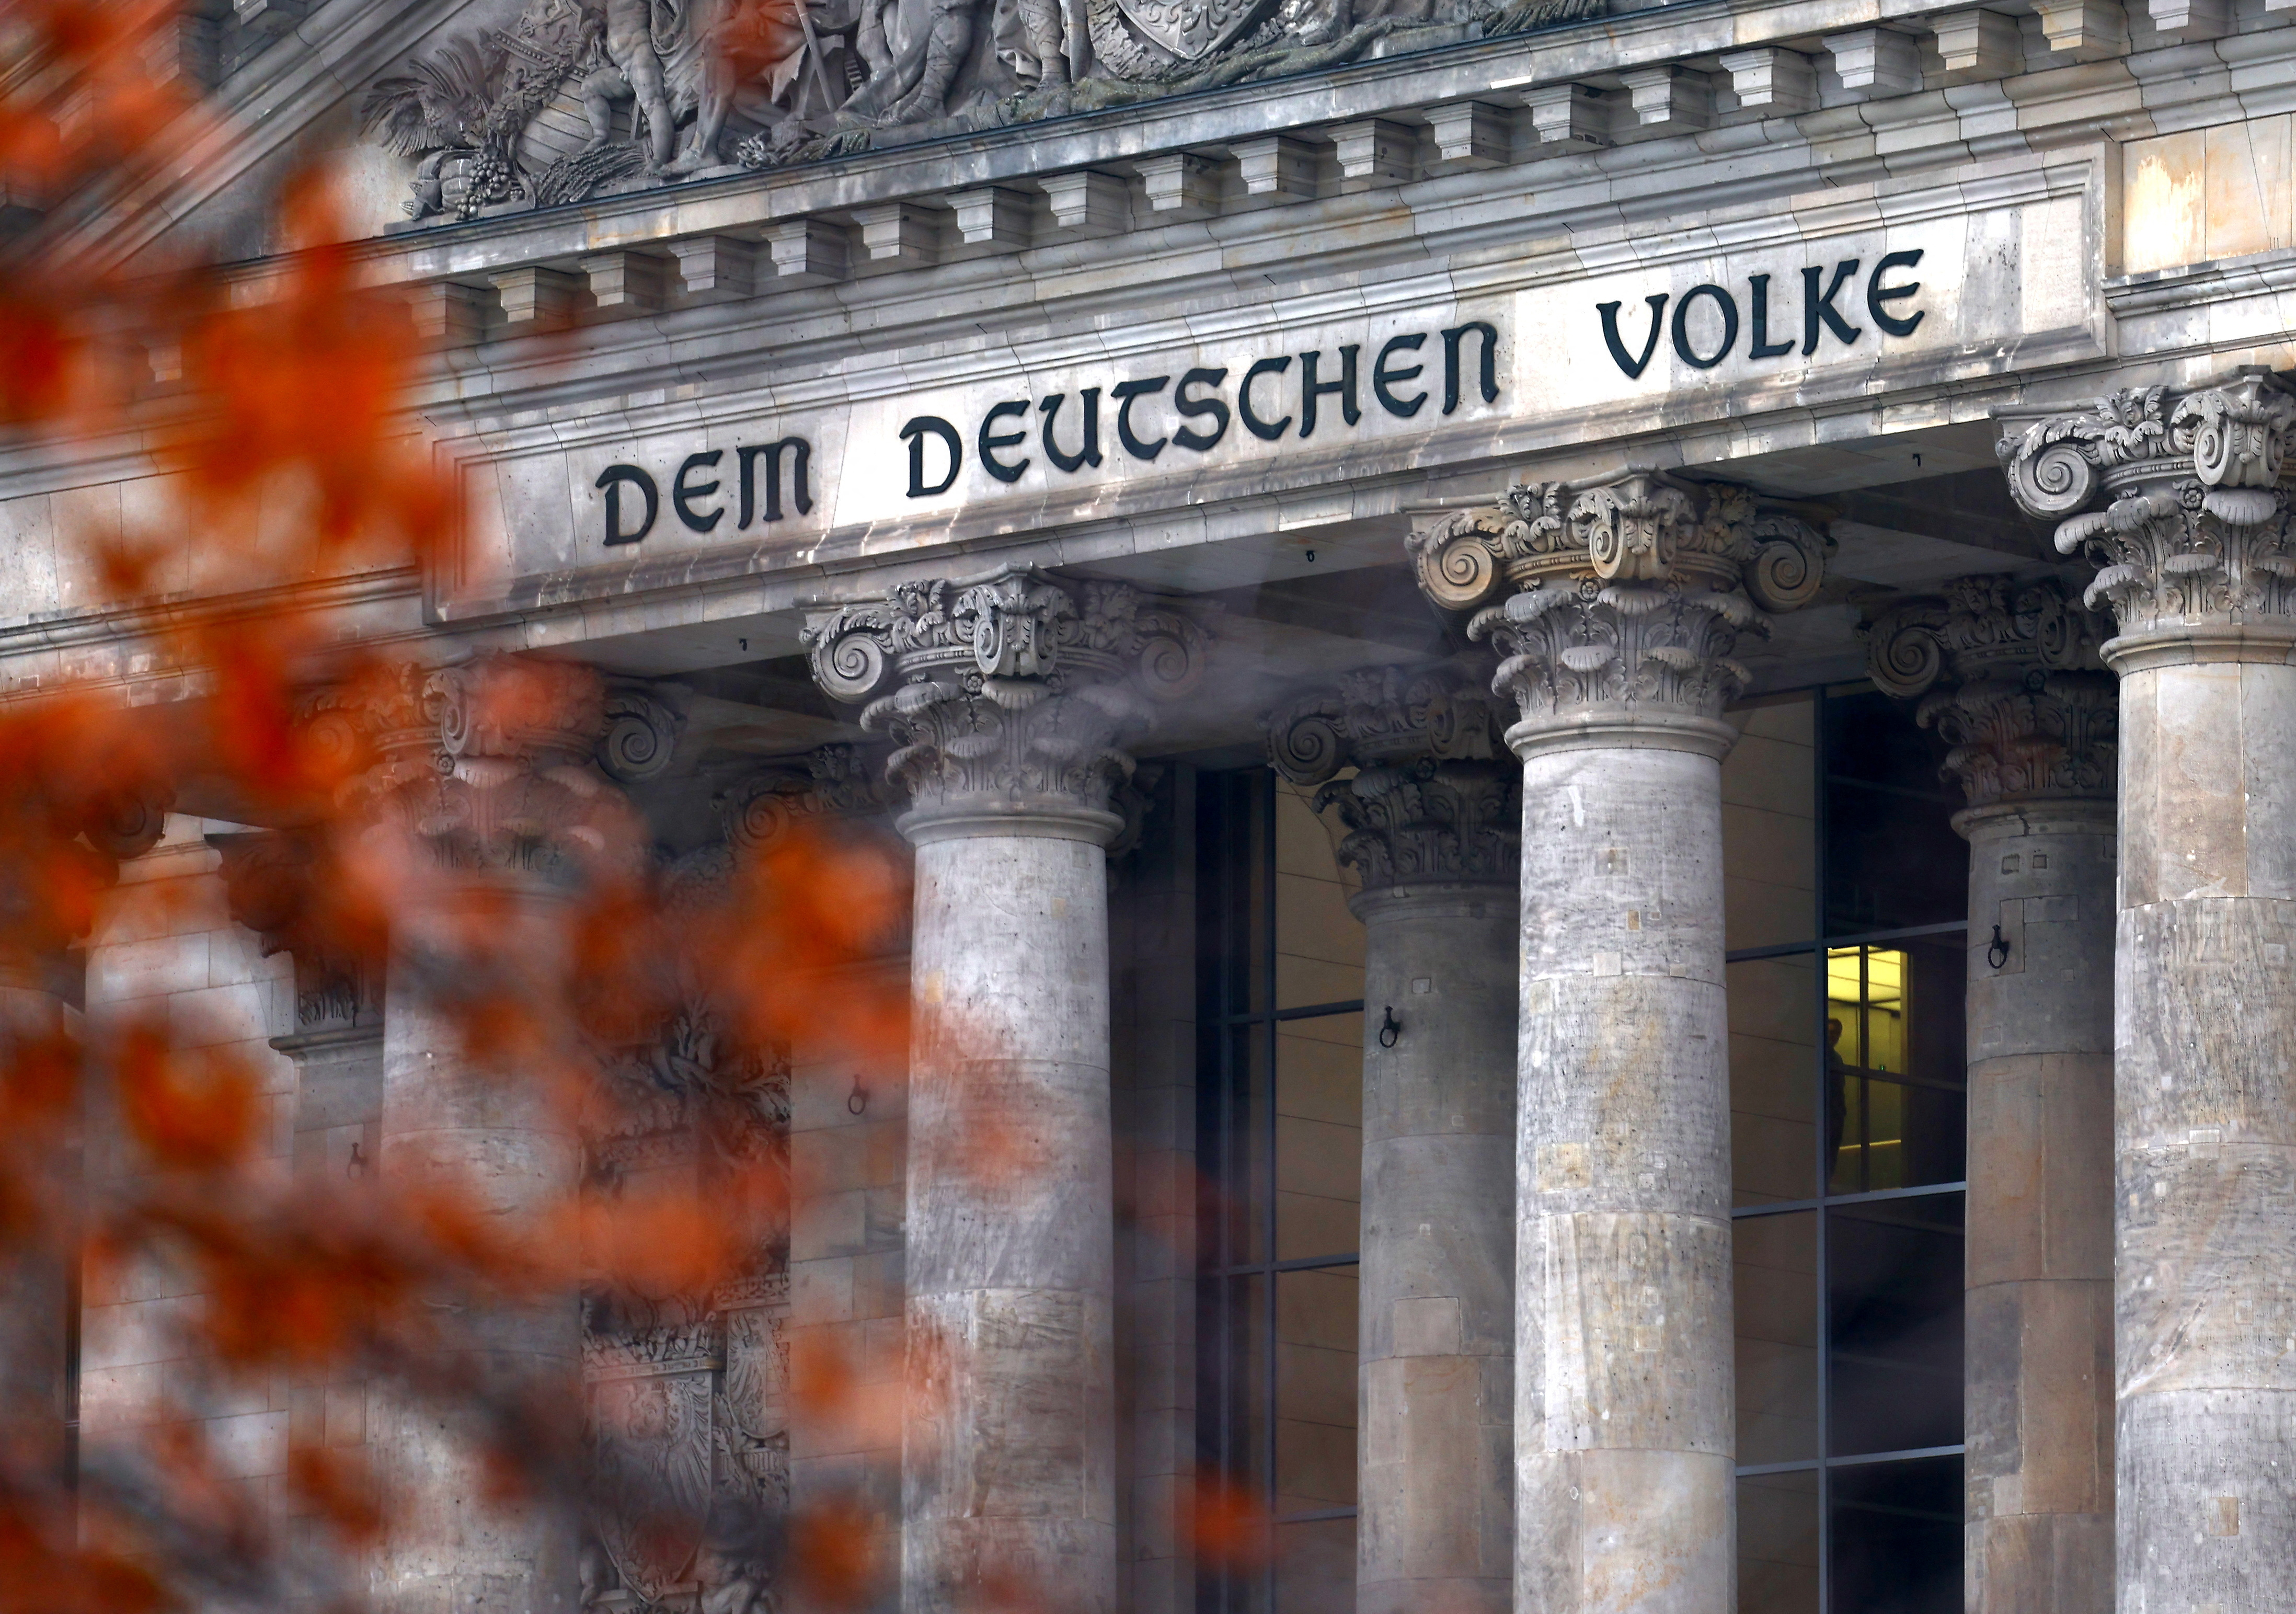 The inscription 'To the German people' is written above the entrance of Reichstag building in Berlin